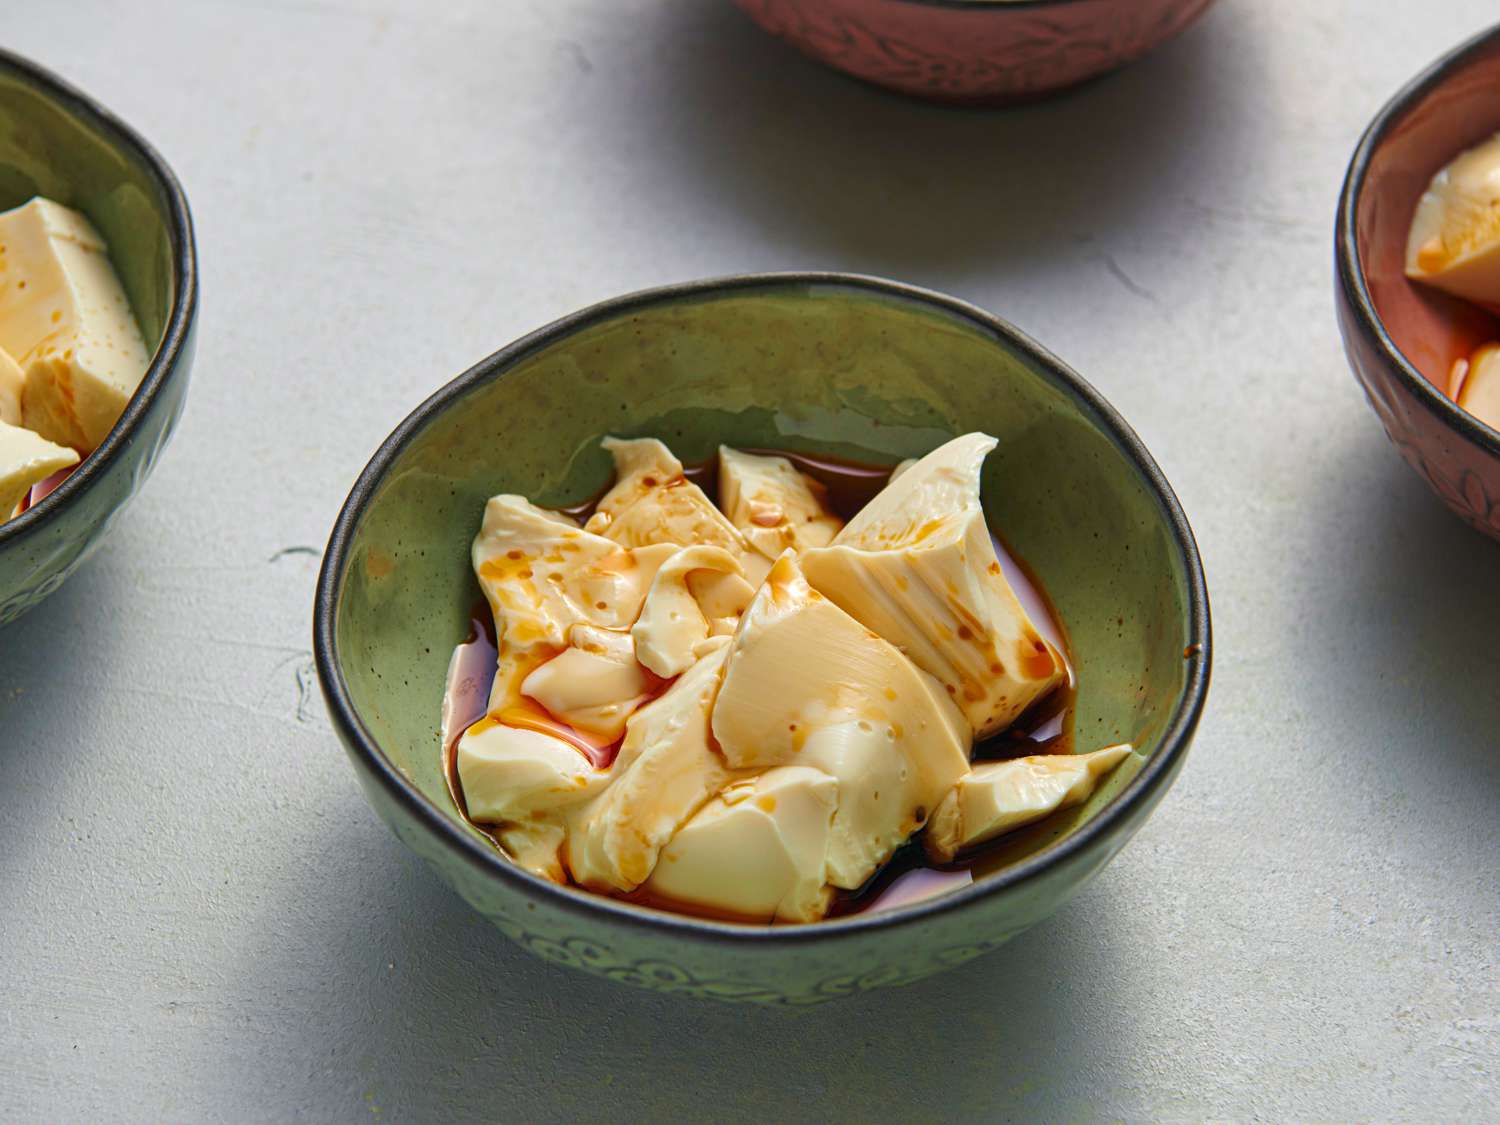 A small, irregularly round glazed ceramic bowl holding soft peaks of silken tofu covered with chili oil, soy sauce, and sesame oil.